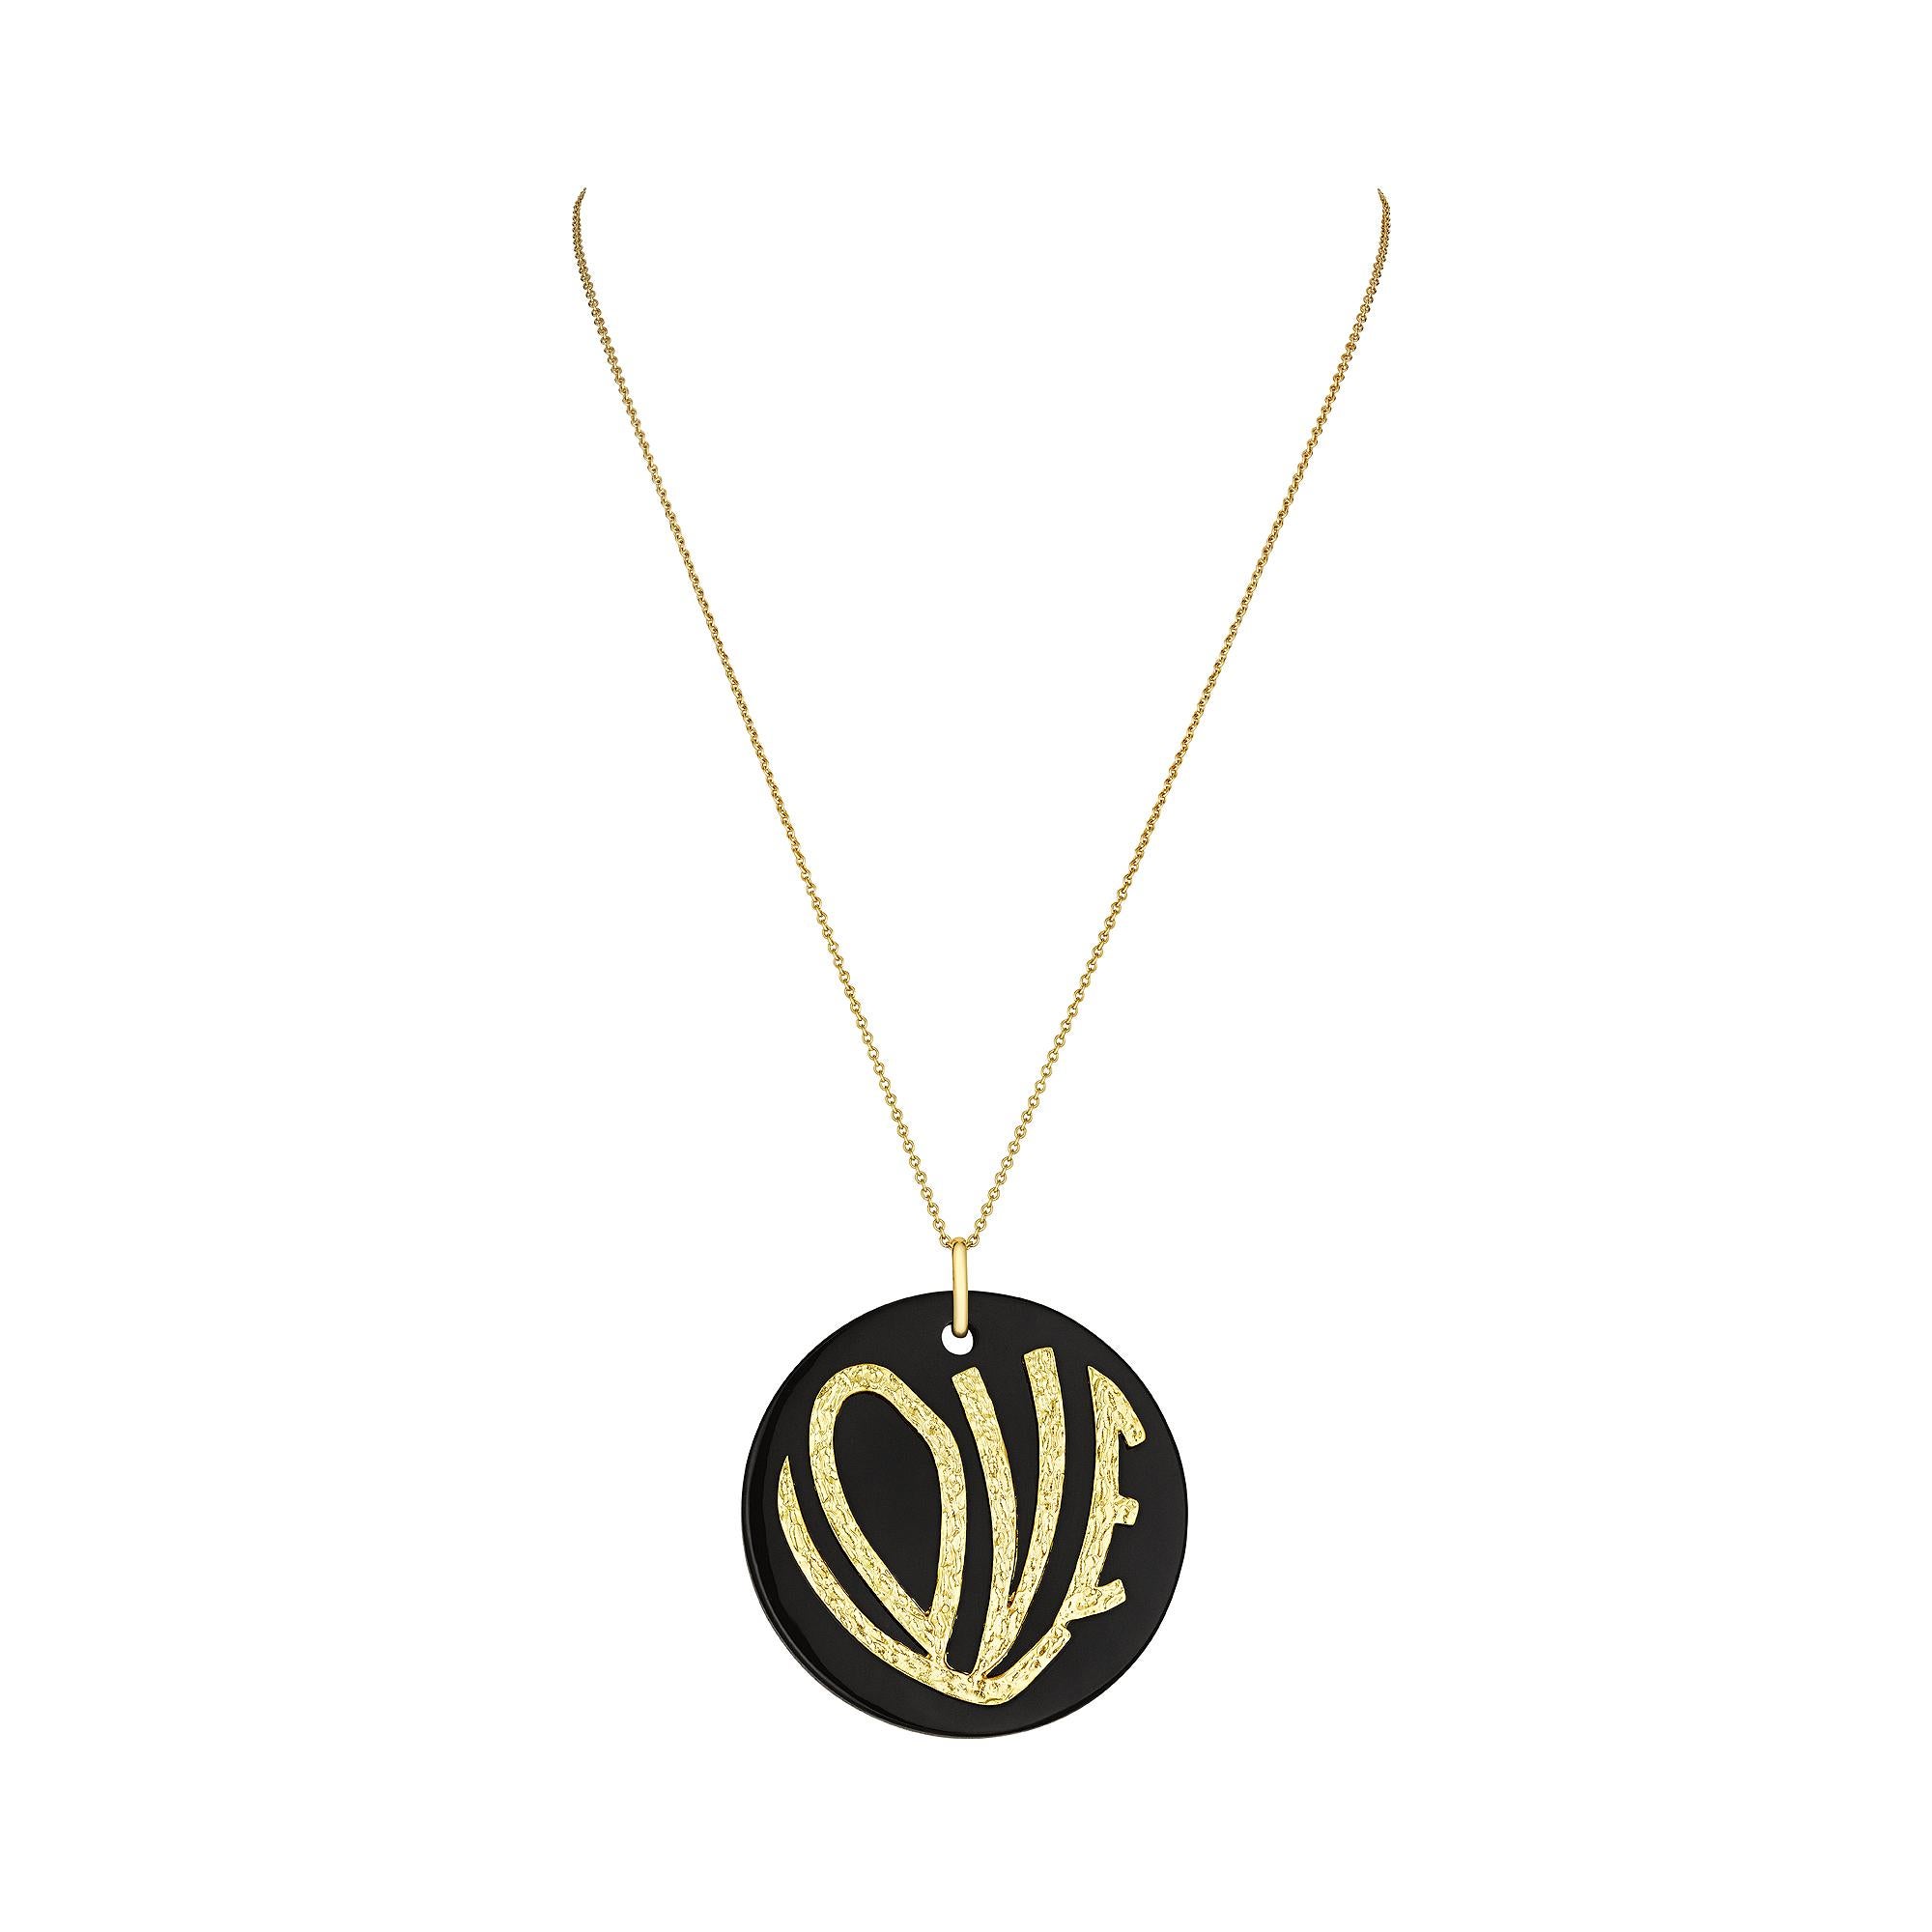 Show your love in full sight with this 1970's inspired large onyx love pendant necklace.  This bold black onyx disc, with the hammered 18 karat yellow gold word LOVE stylishly applied to the front, makes this necklace a powerful and heartfelt